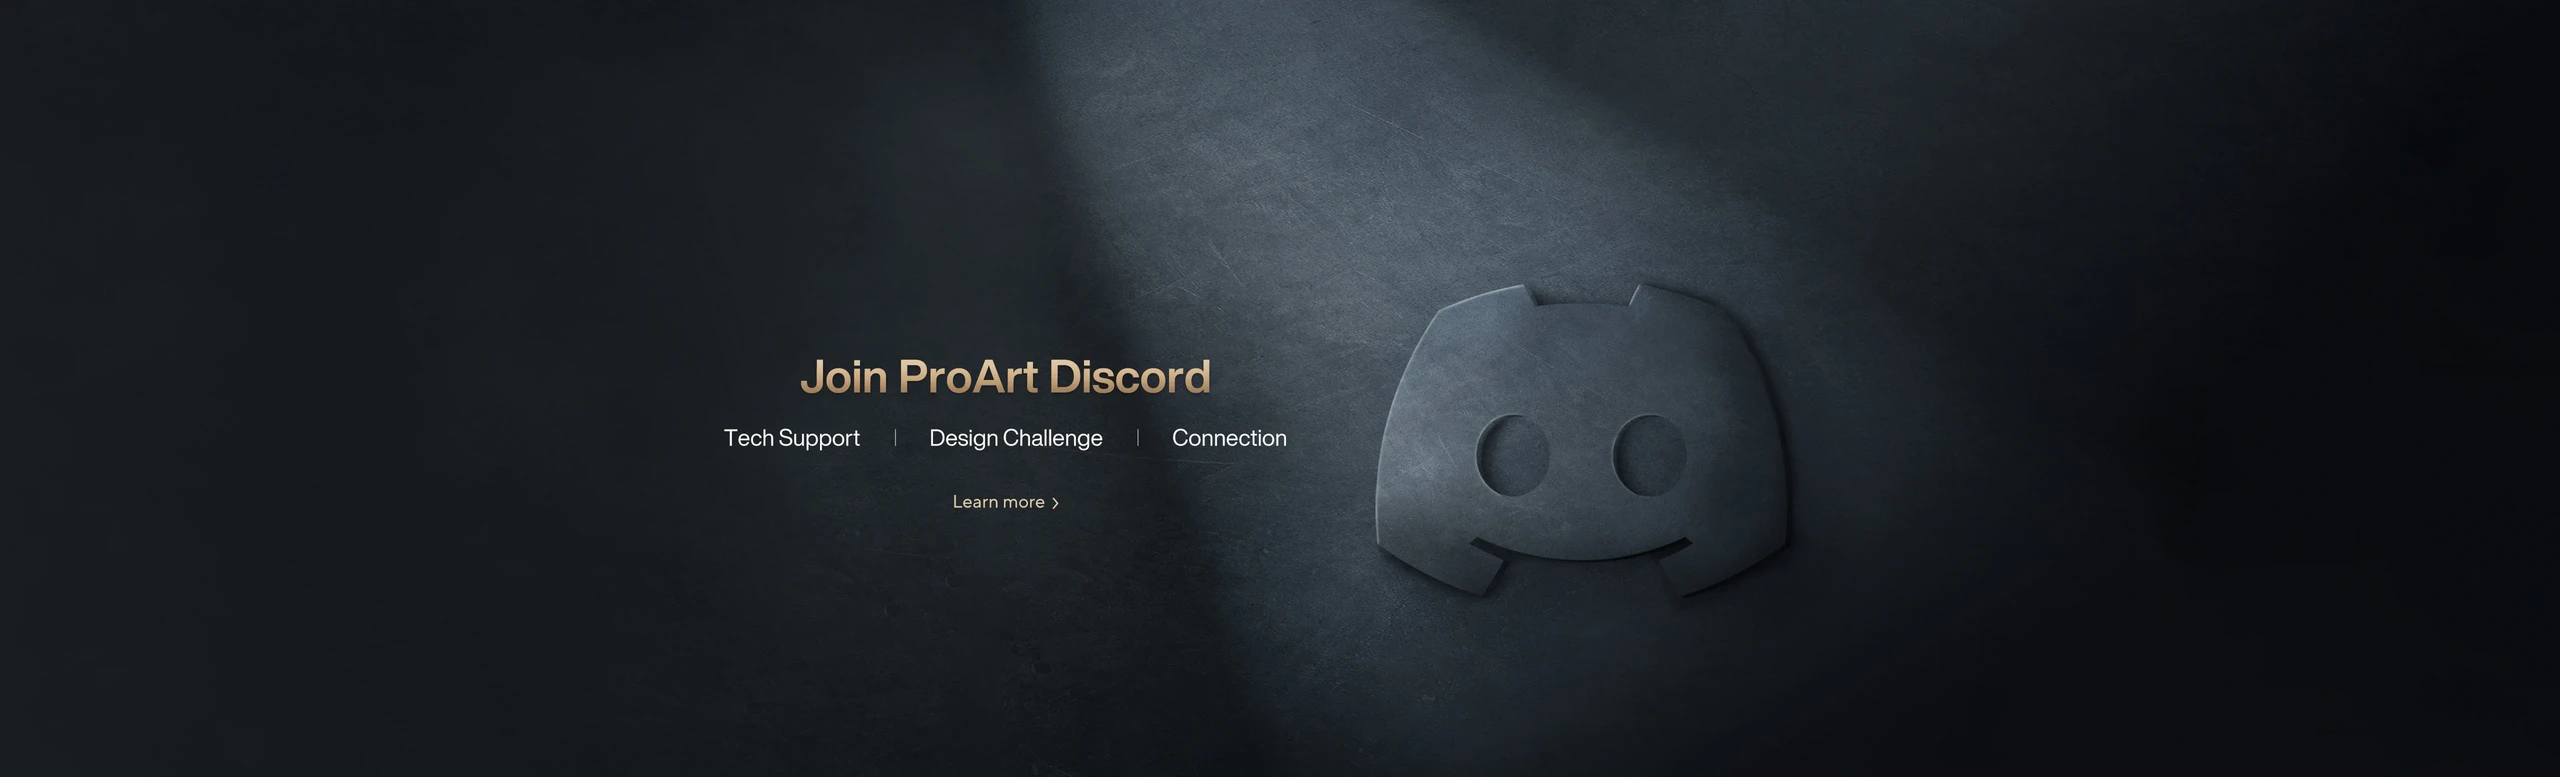 Join ProArt Discord. Tech Support, Connectio, Design Challenge